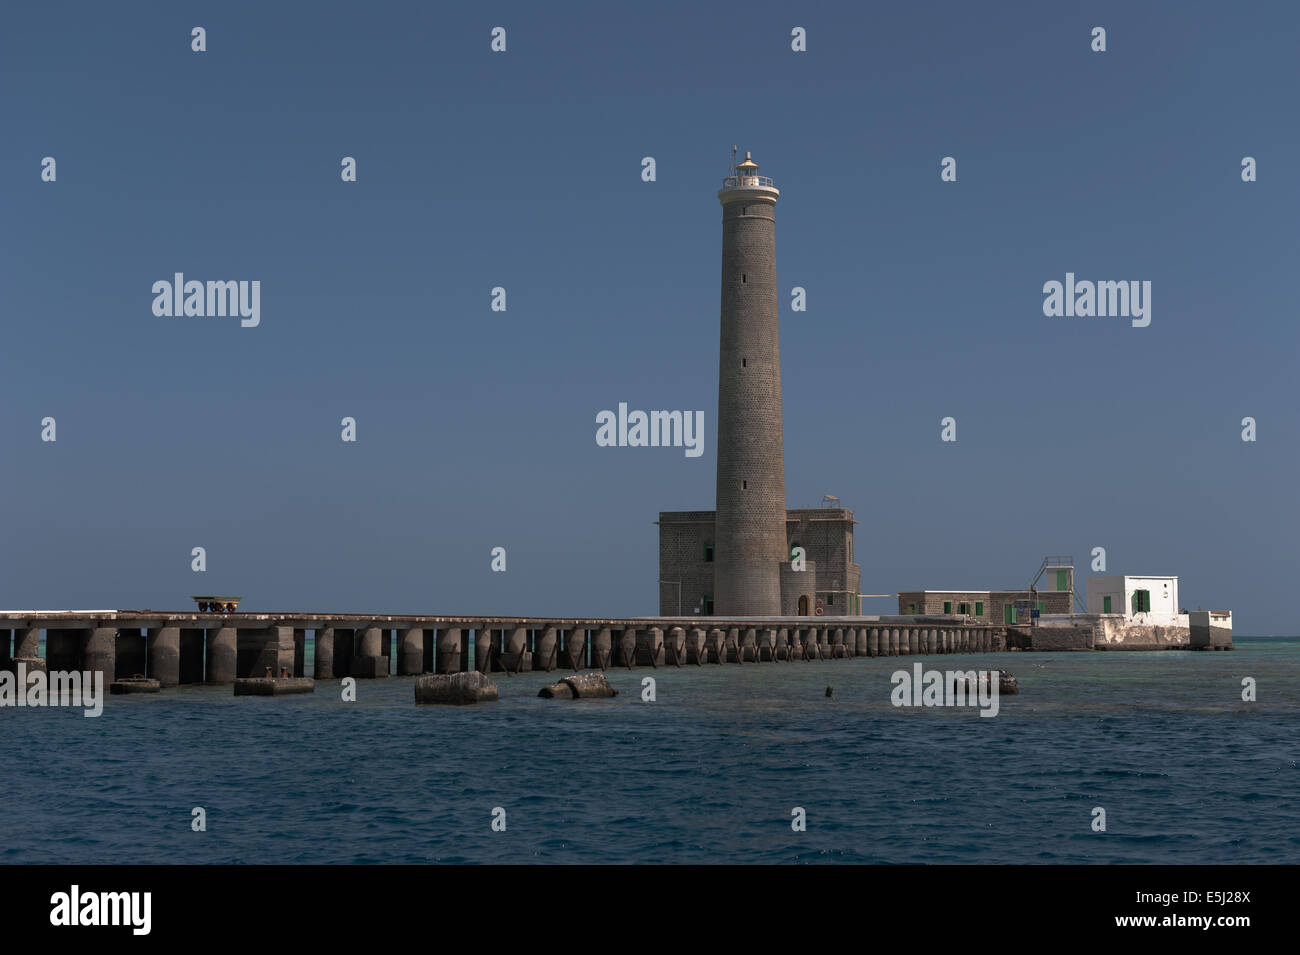 Lighthouse at Sanganeb reef in the Red Sea off Sudan coast Stock Photo